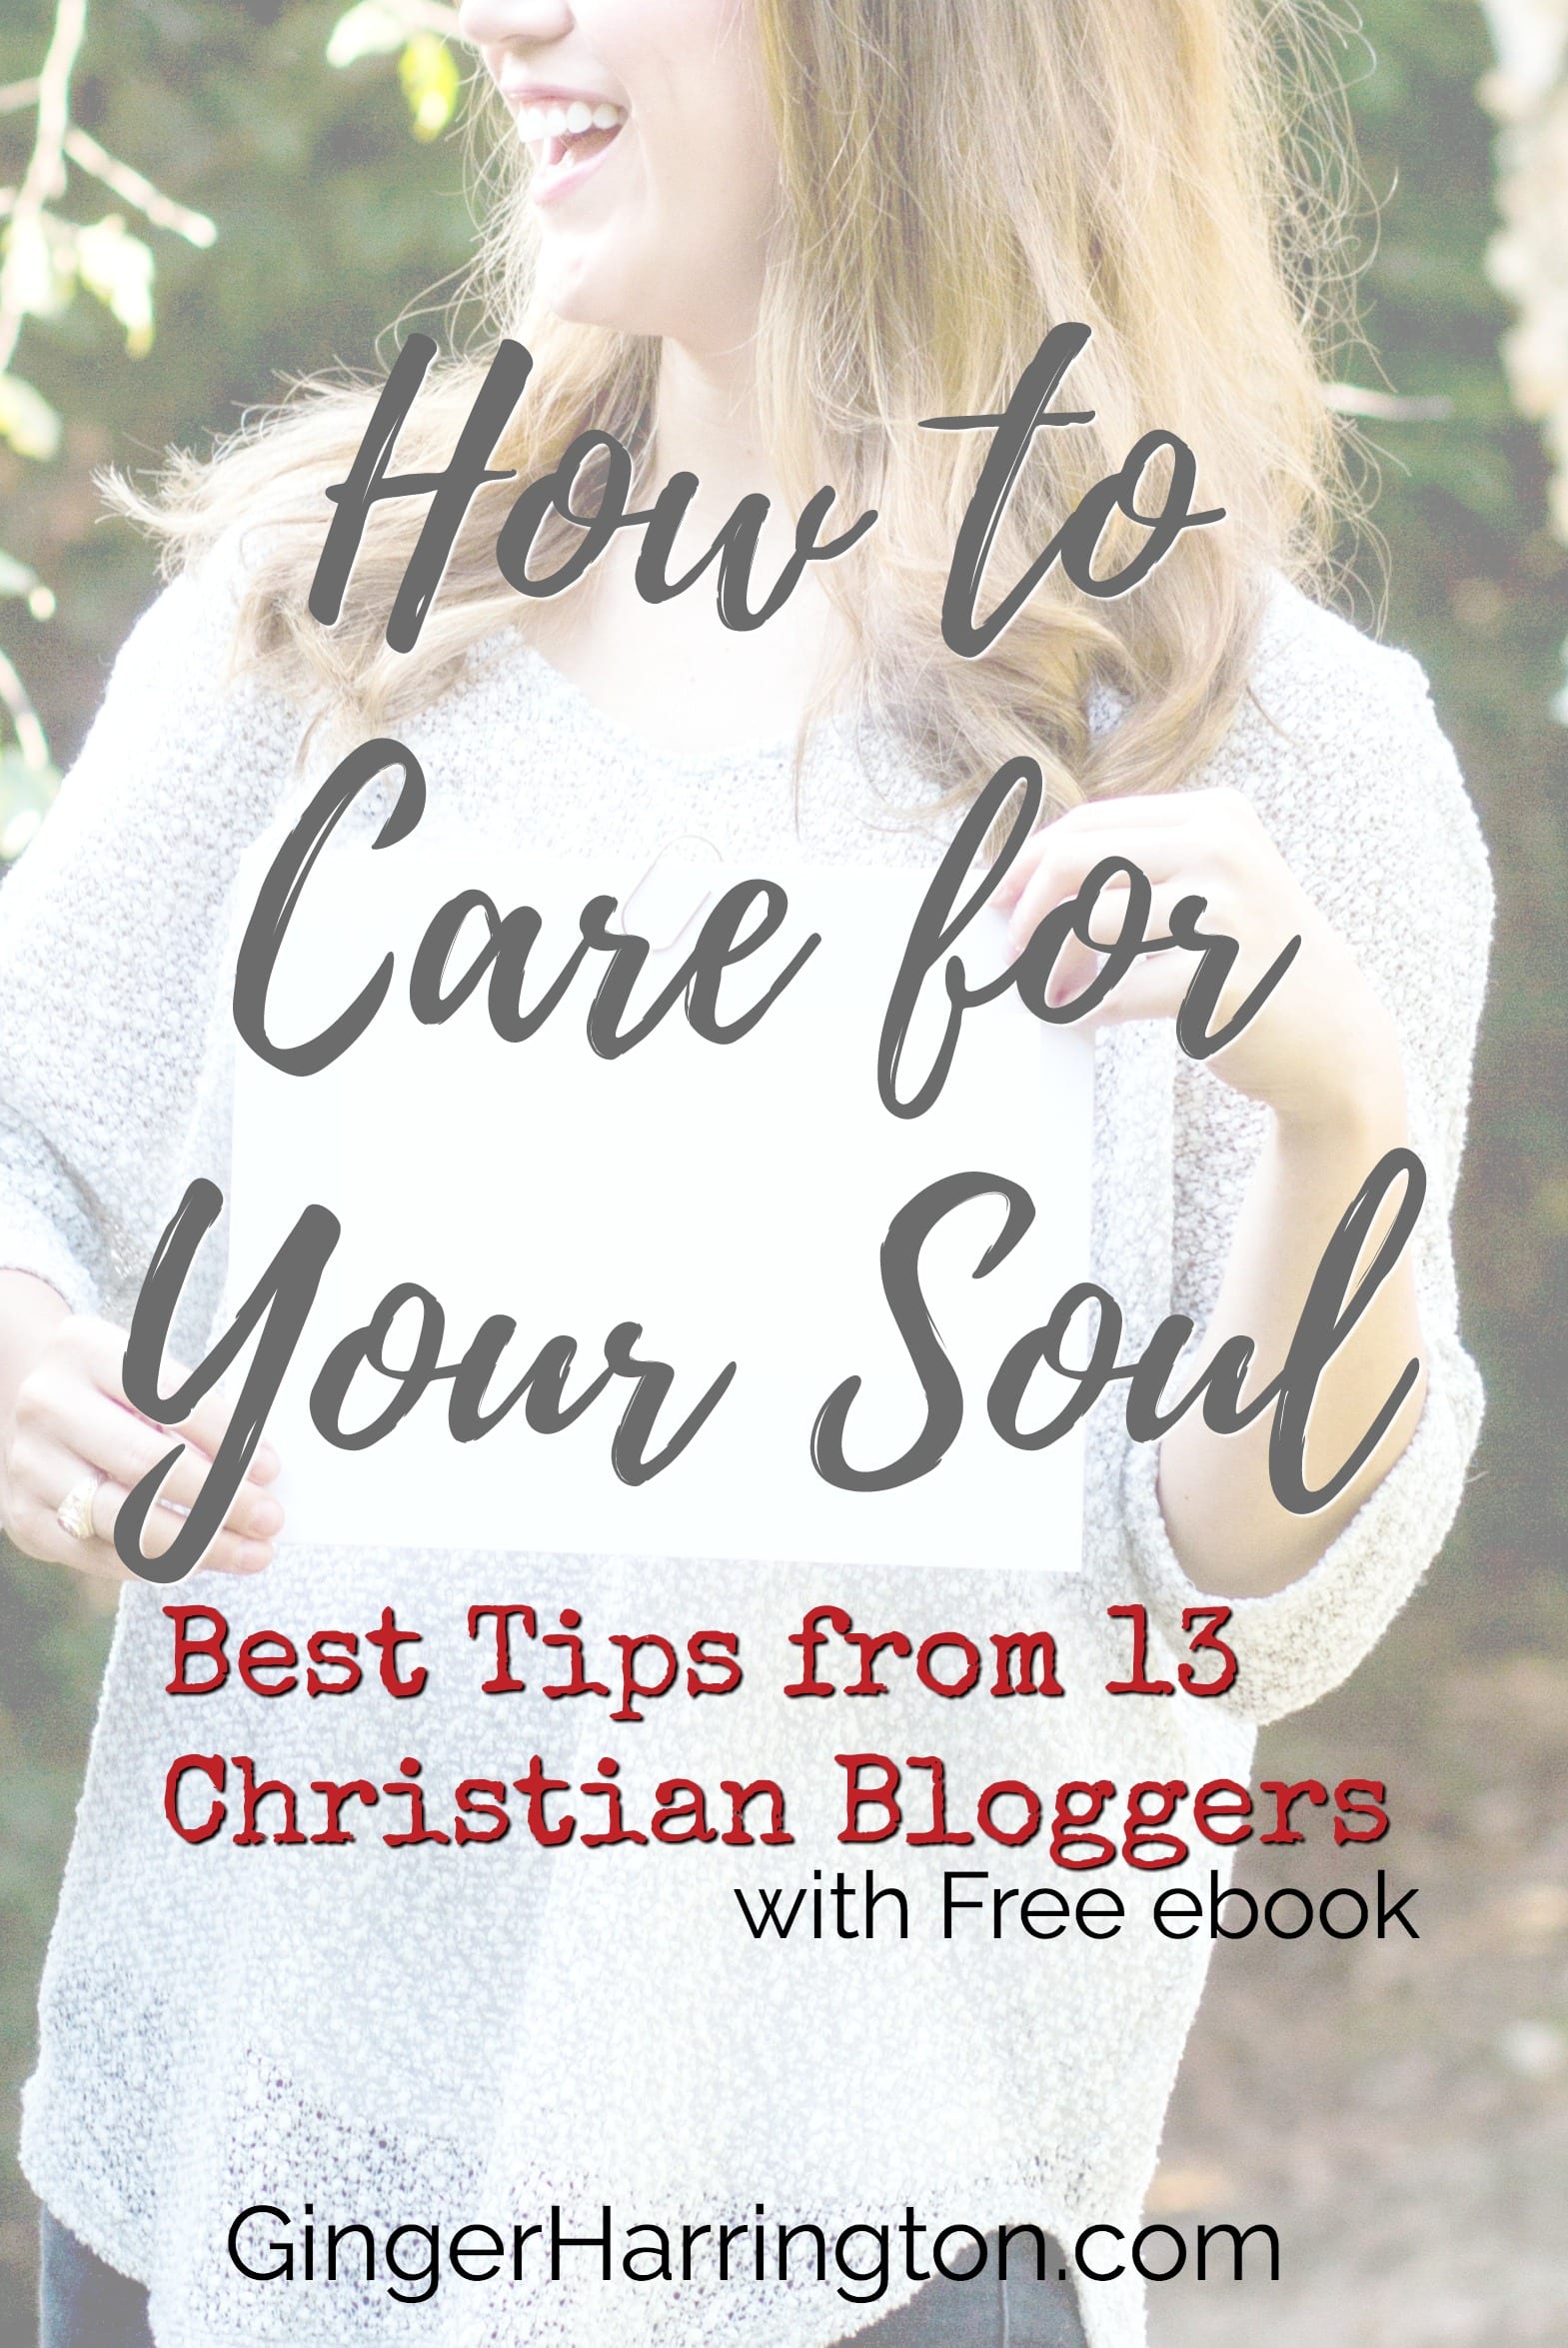 How to Care for Your Soul: Best Tips from 13 Bloggers 